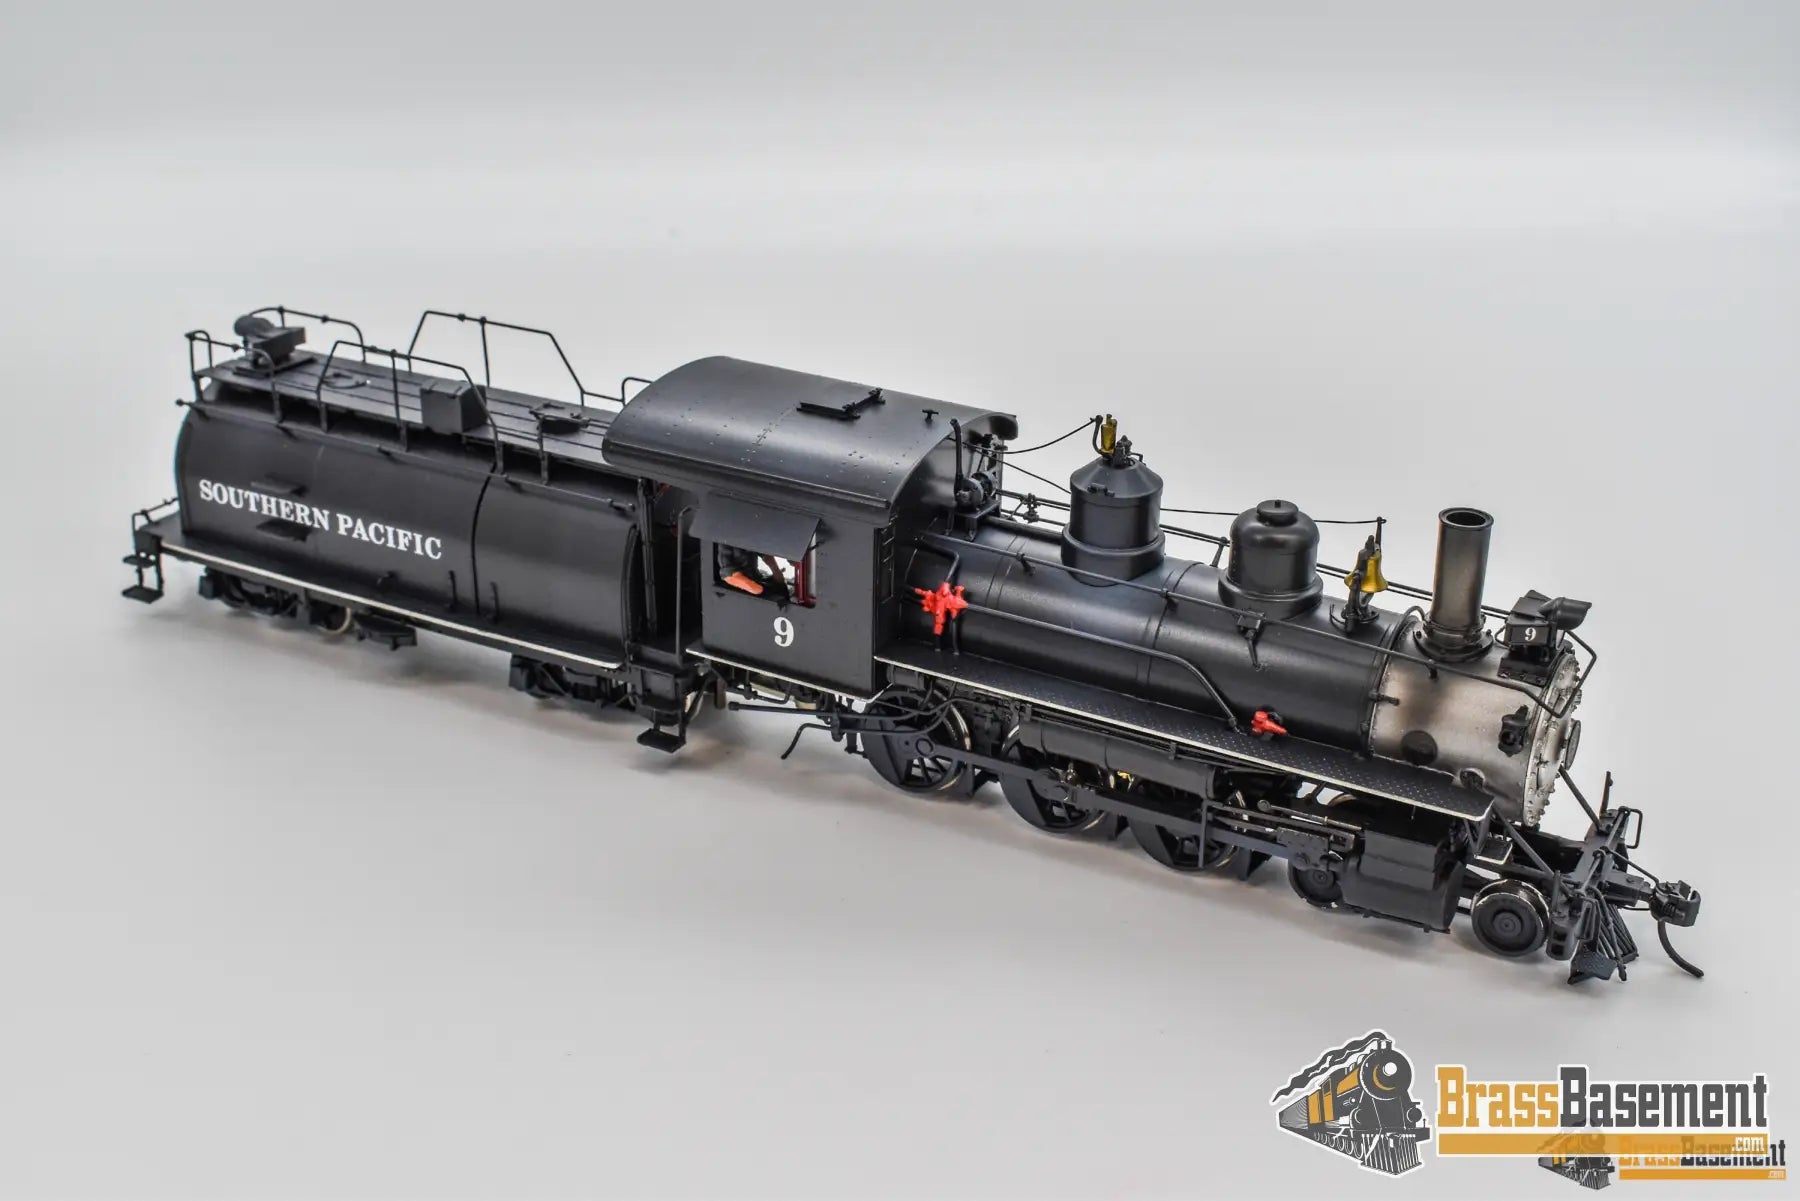 Sn3 Brass - Pbl Southern Pacific 4 - 6 - 0 #9 Foreground Model W/ Sound Steam